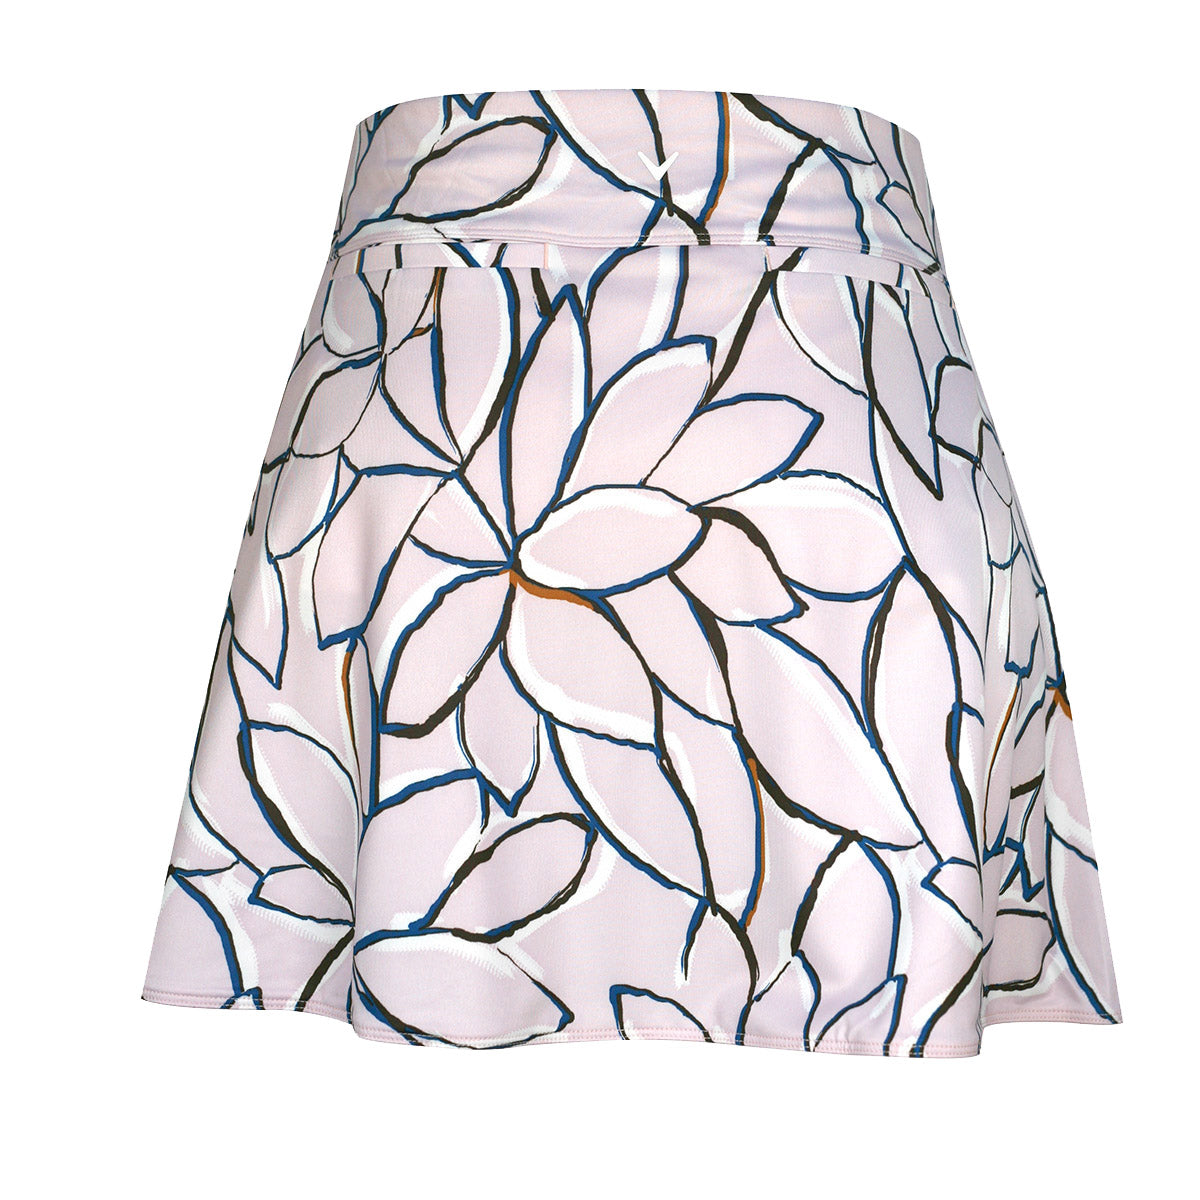 Callaway Ladies Pull-On Skort with Linear Floral Print in Pink Nectar